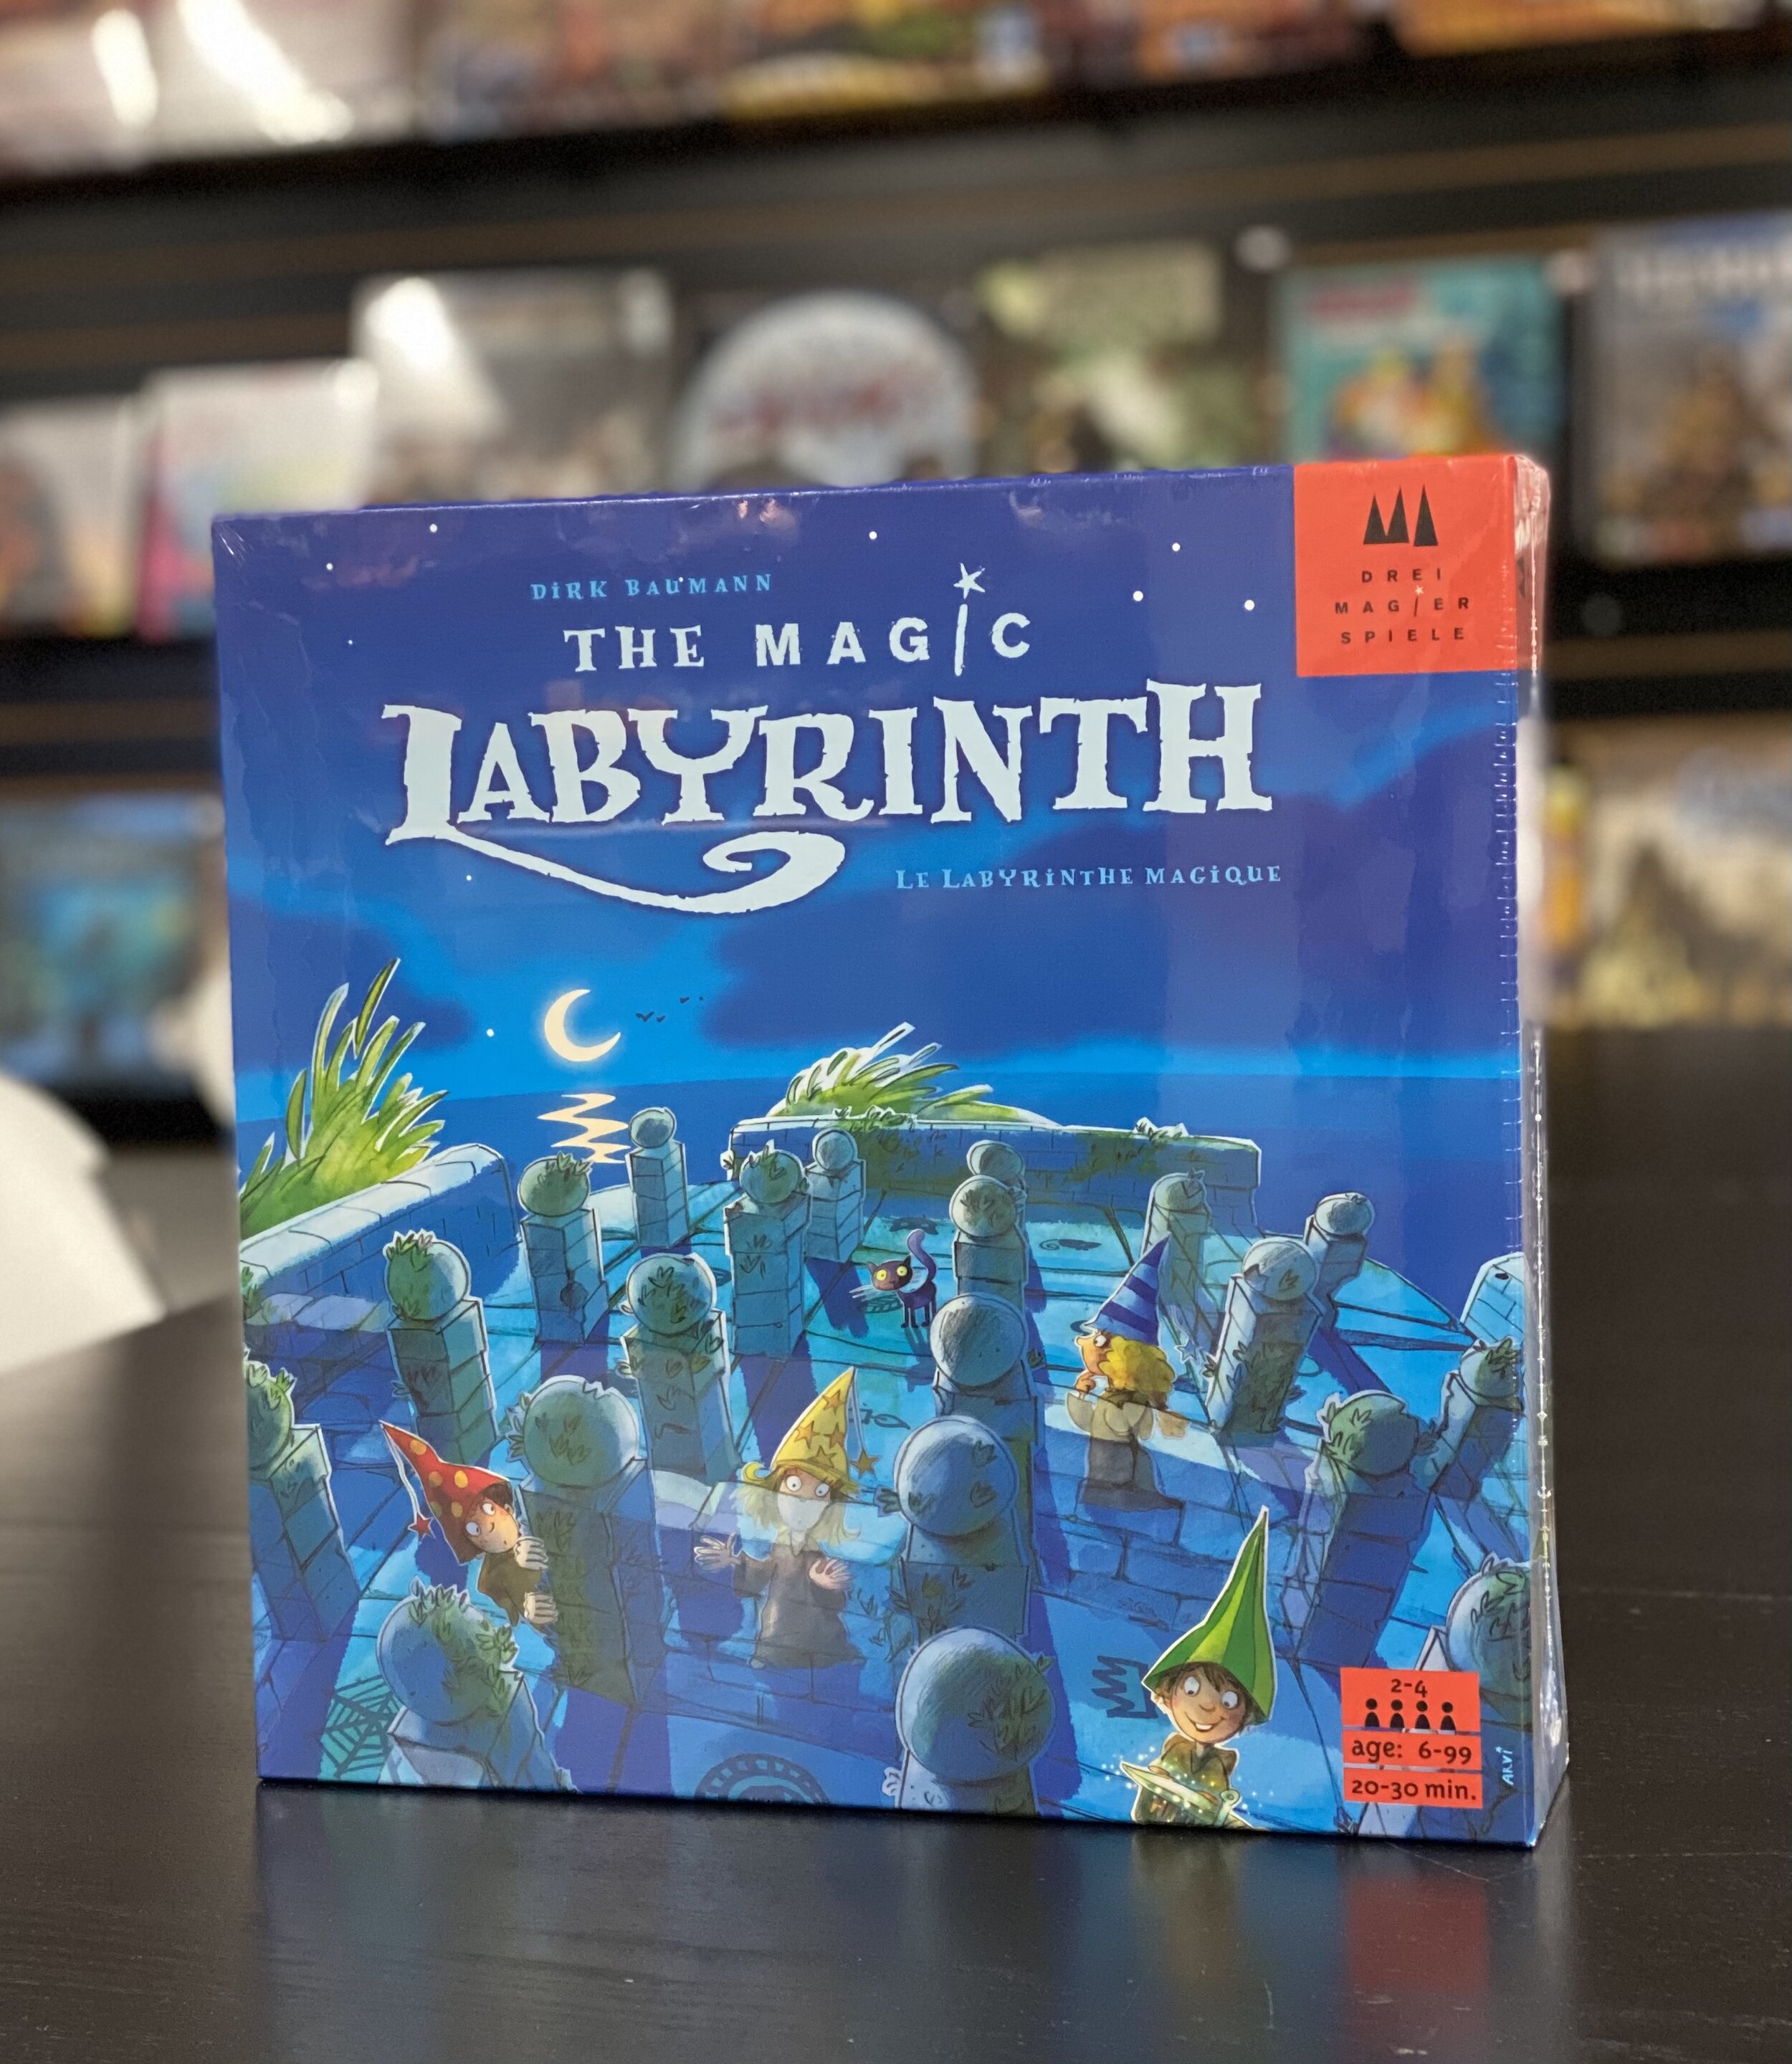 Mysterium — Cabbages and Kings Games